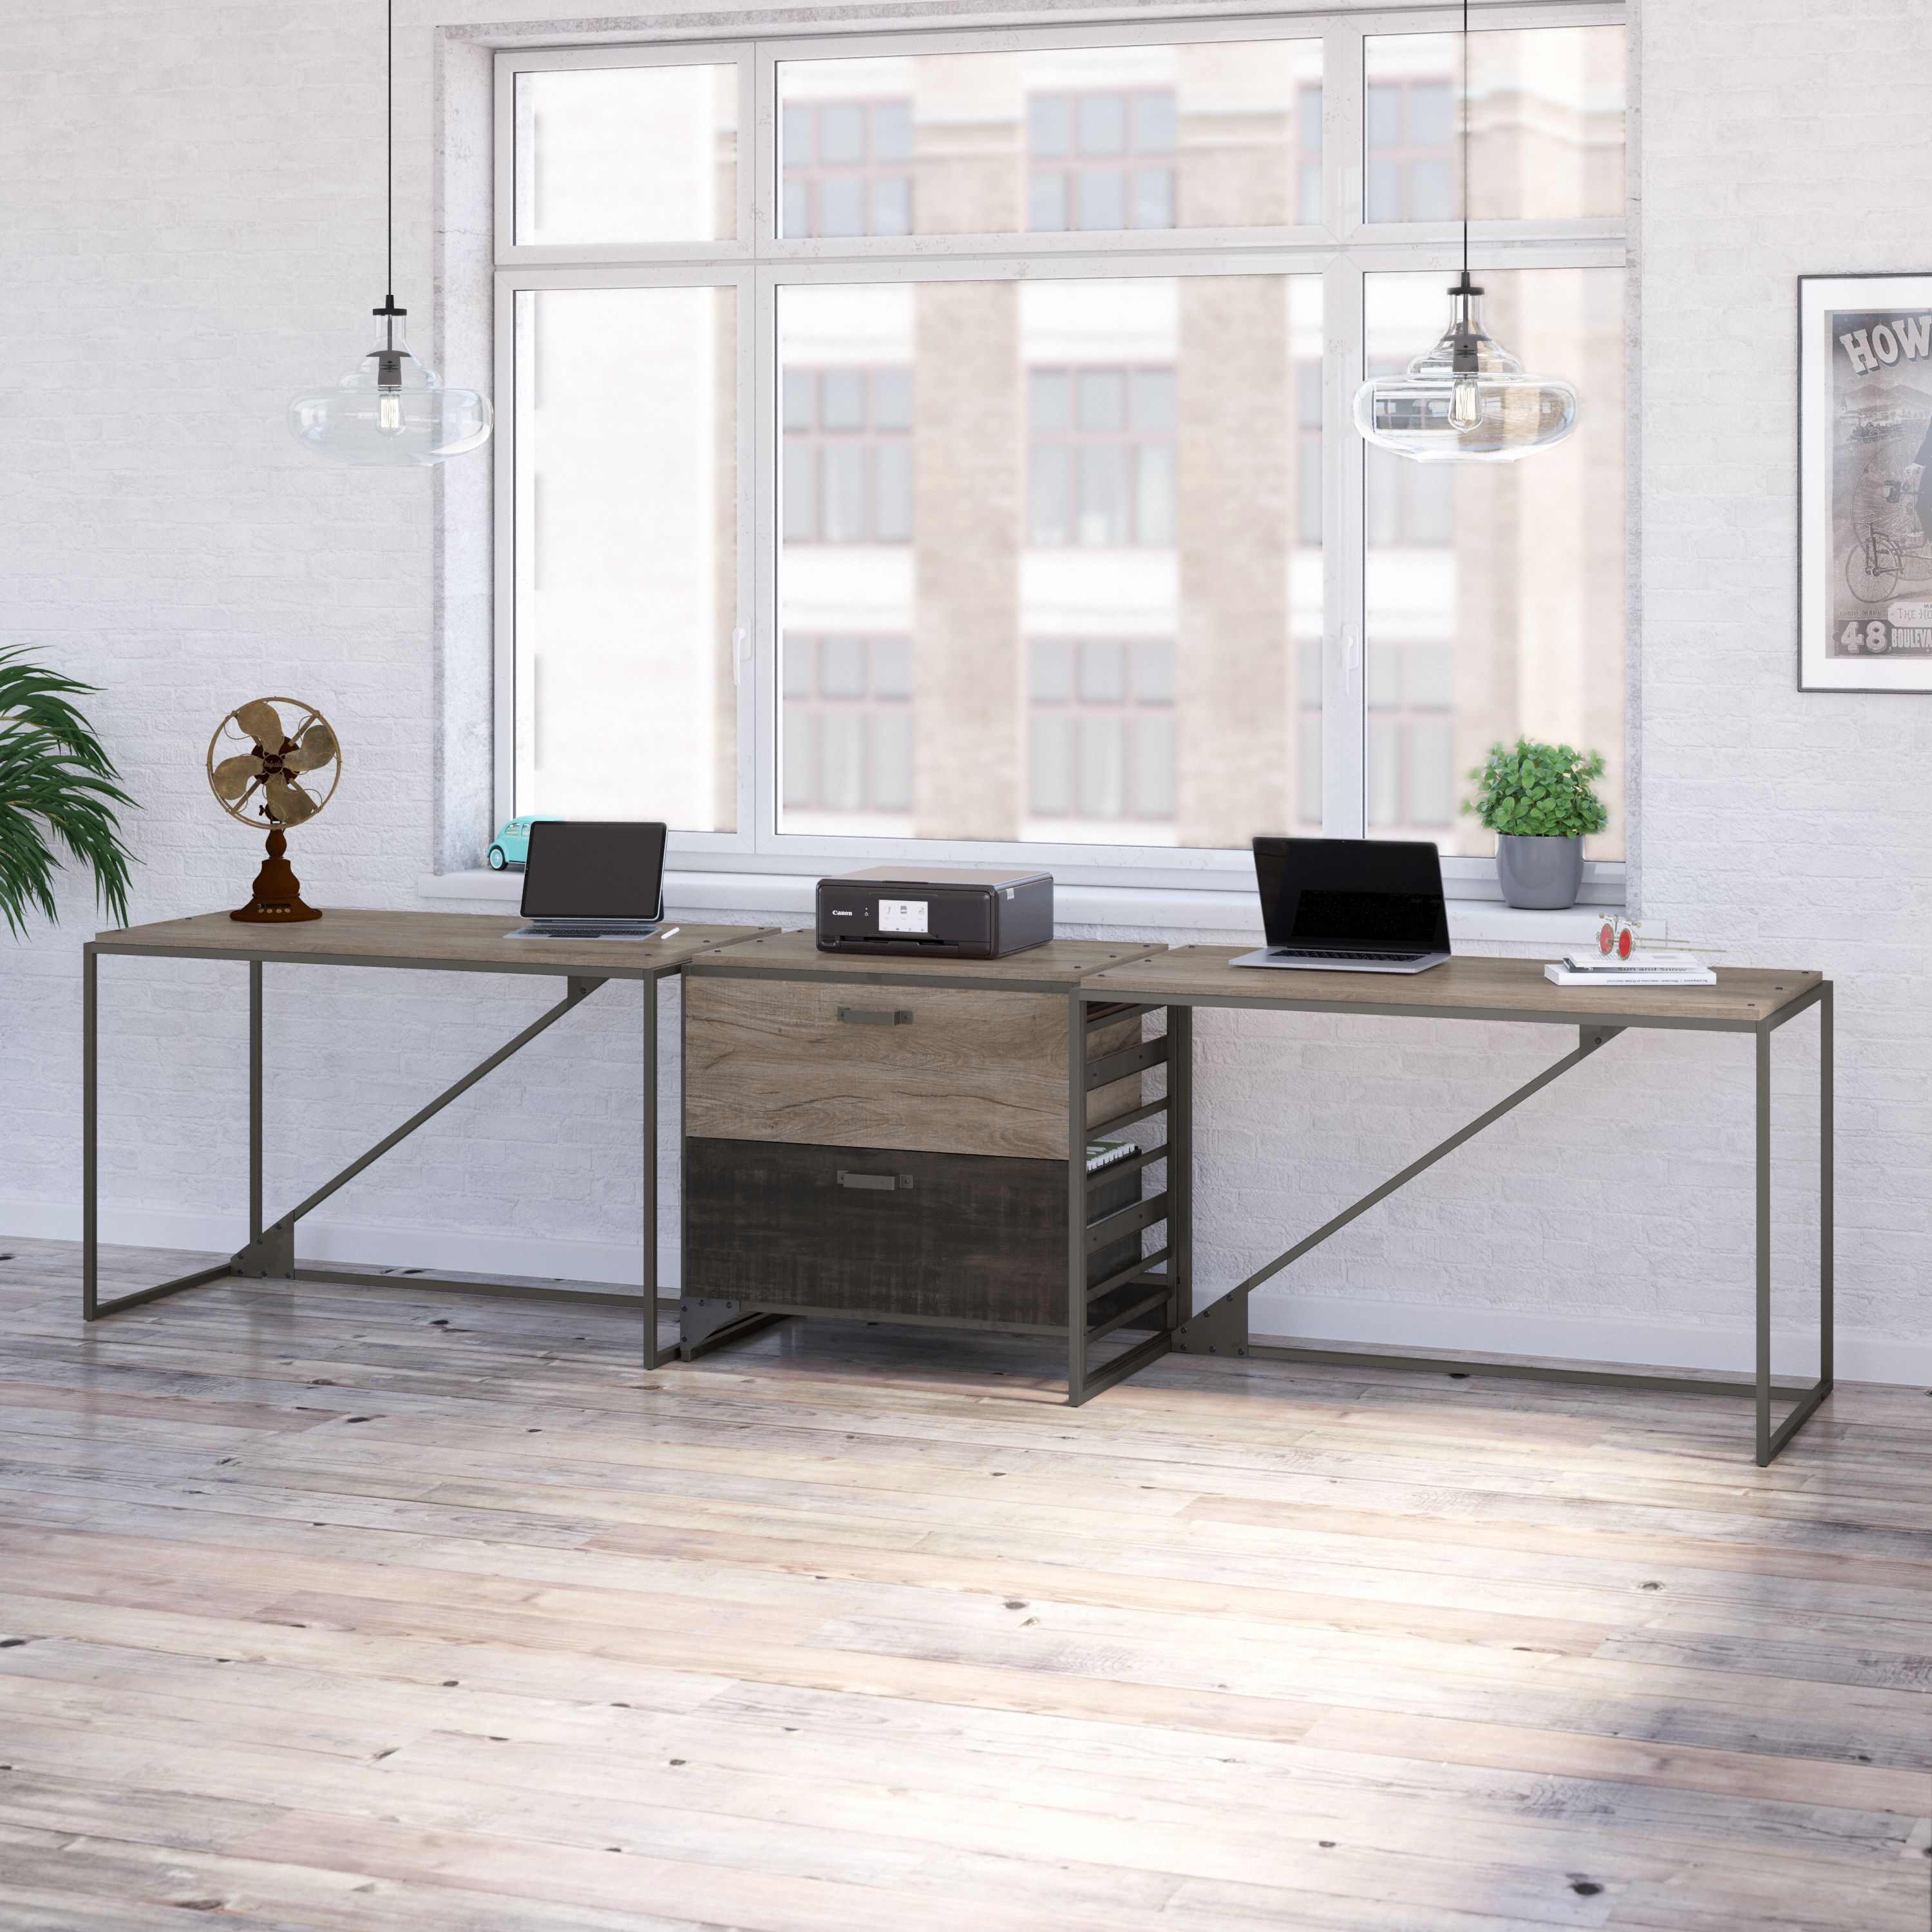 Shop Bush Furniture Refinery 2 Person Industrial Desk Set with Lateral File Cabinet 01 RFY019RG #color_rustic gray/charred wood